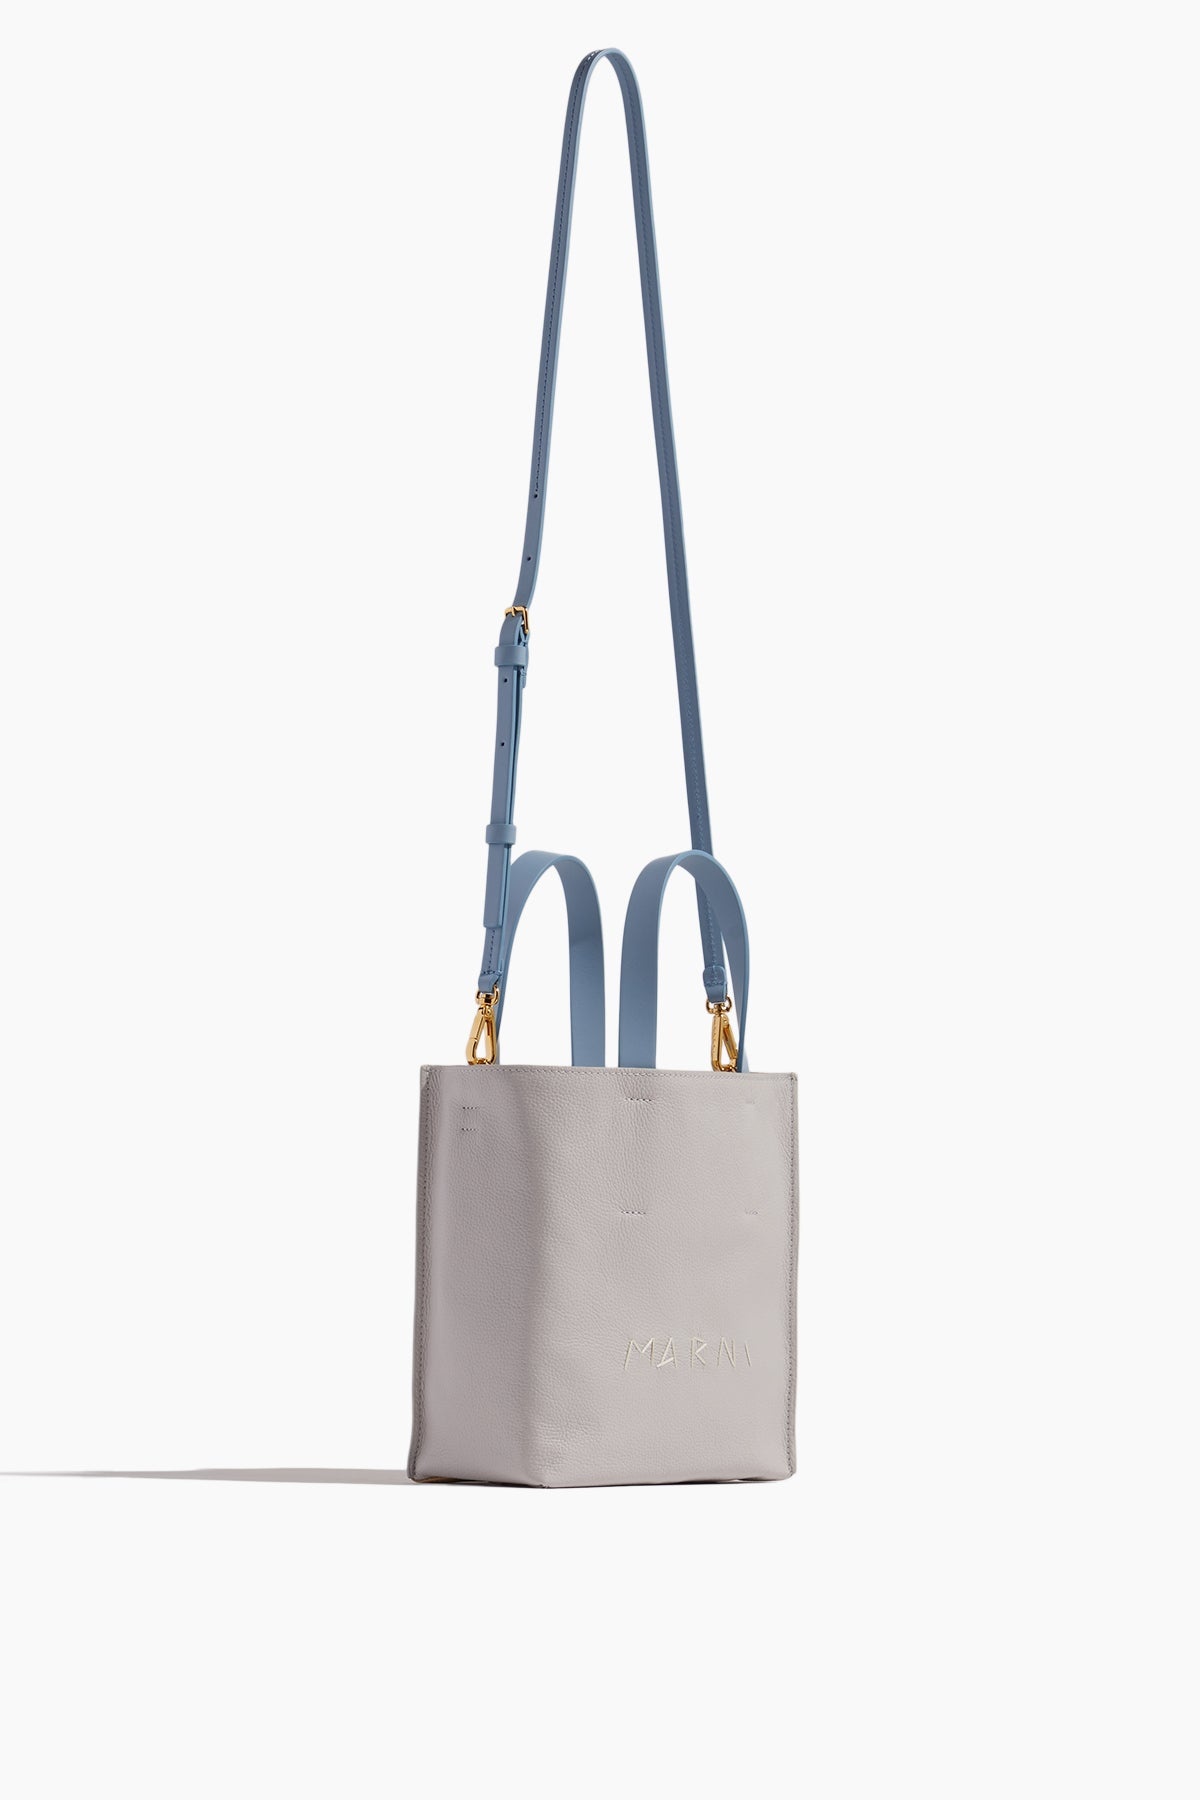 Museo Soft Mini Tote in Sodium/Nomad/Dusty Blue - 2